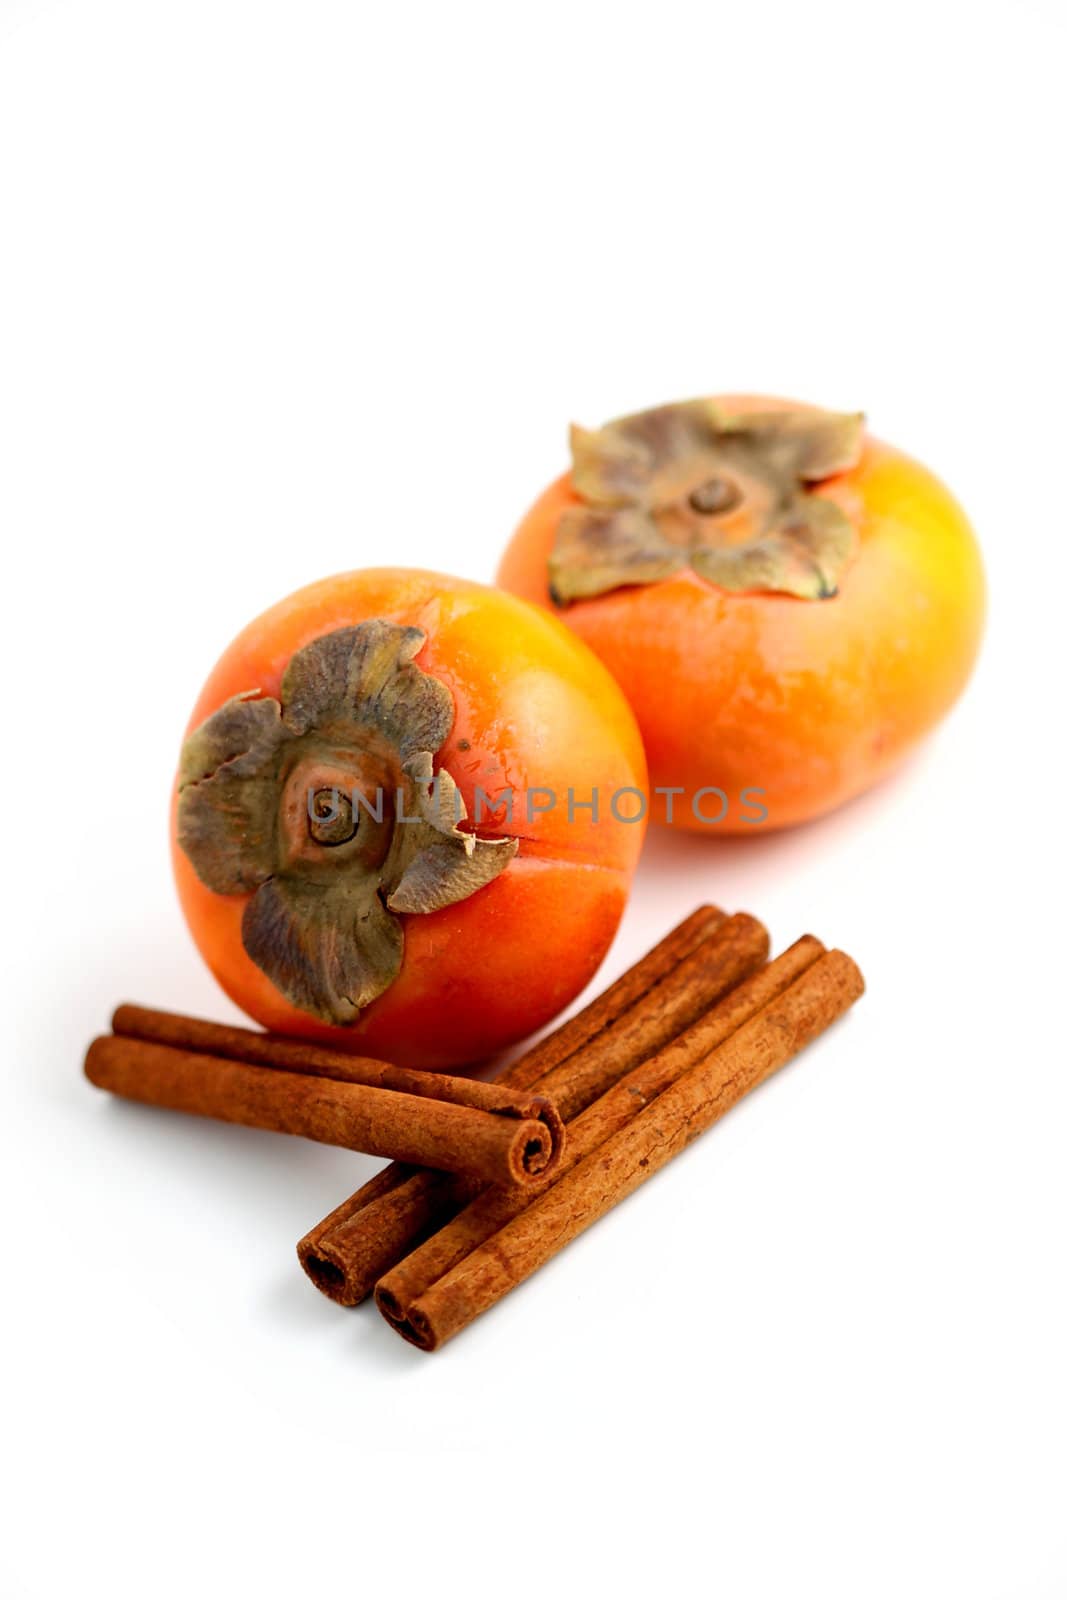 Persimmon Cinnamon by hlehnerer